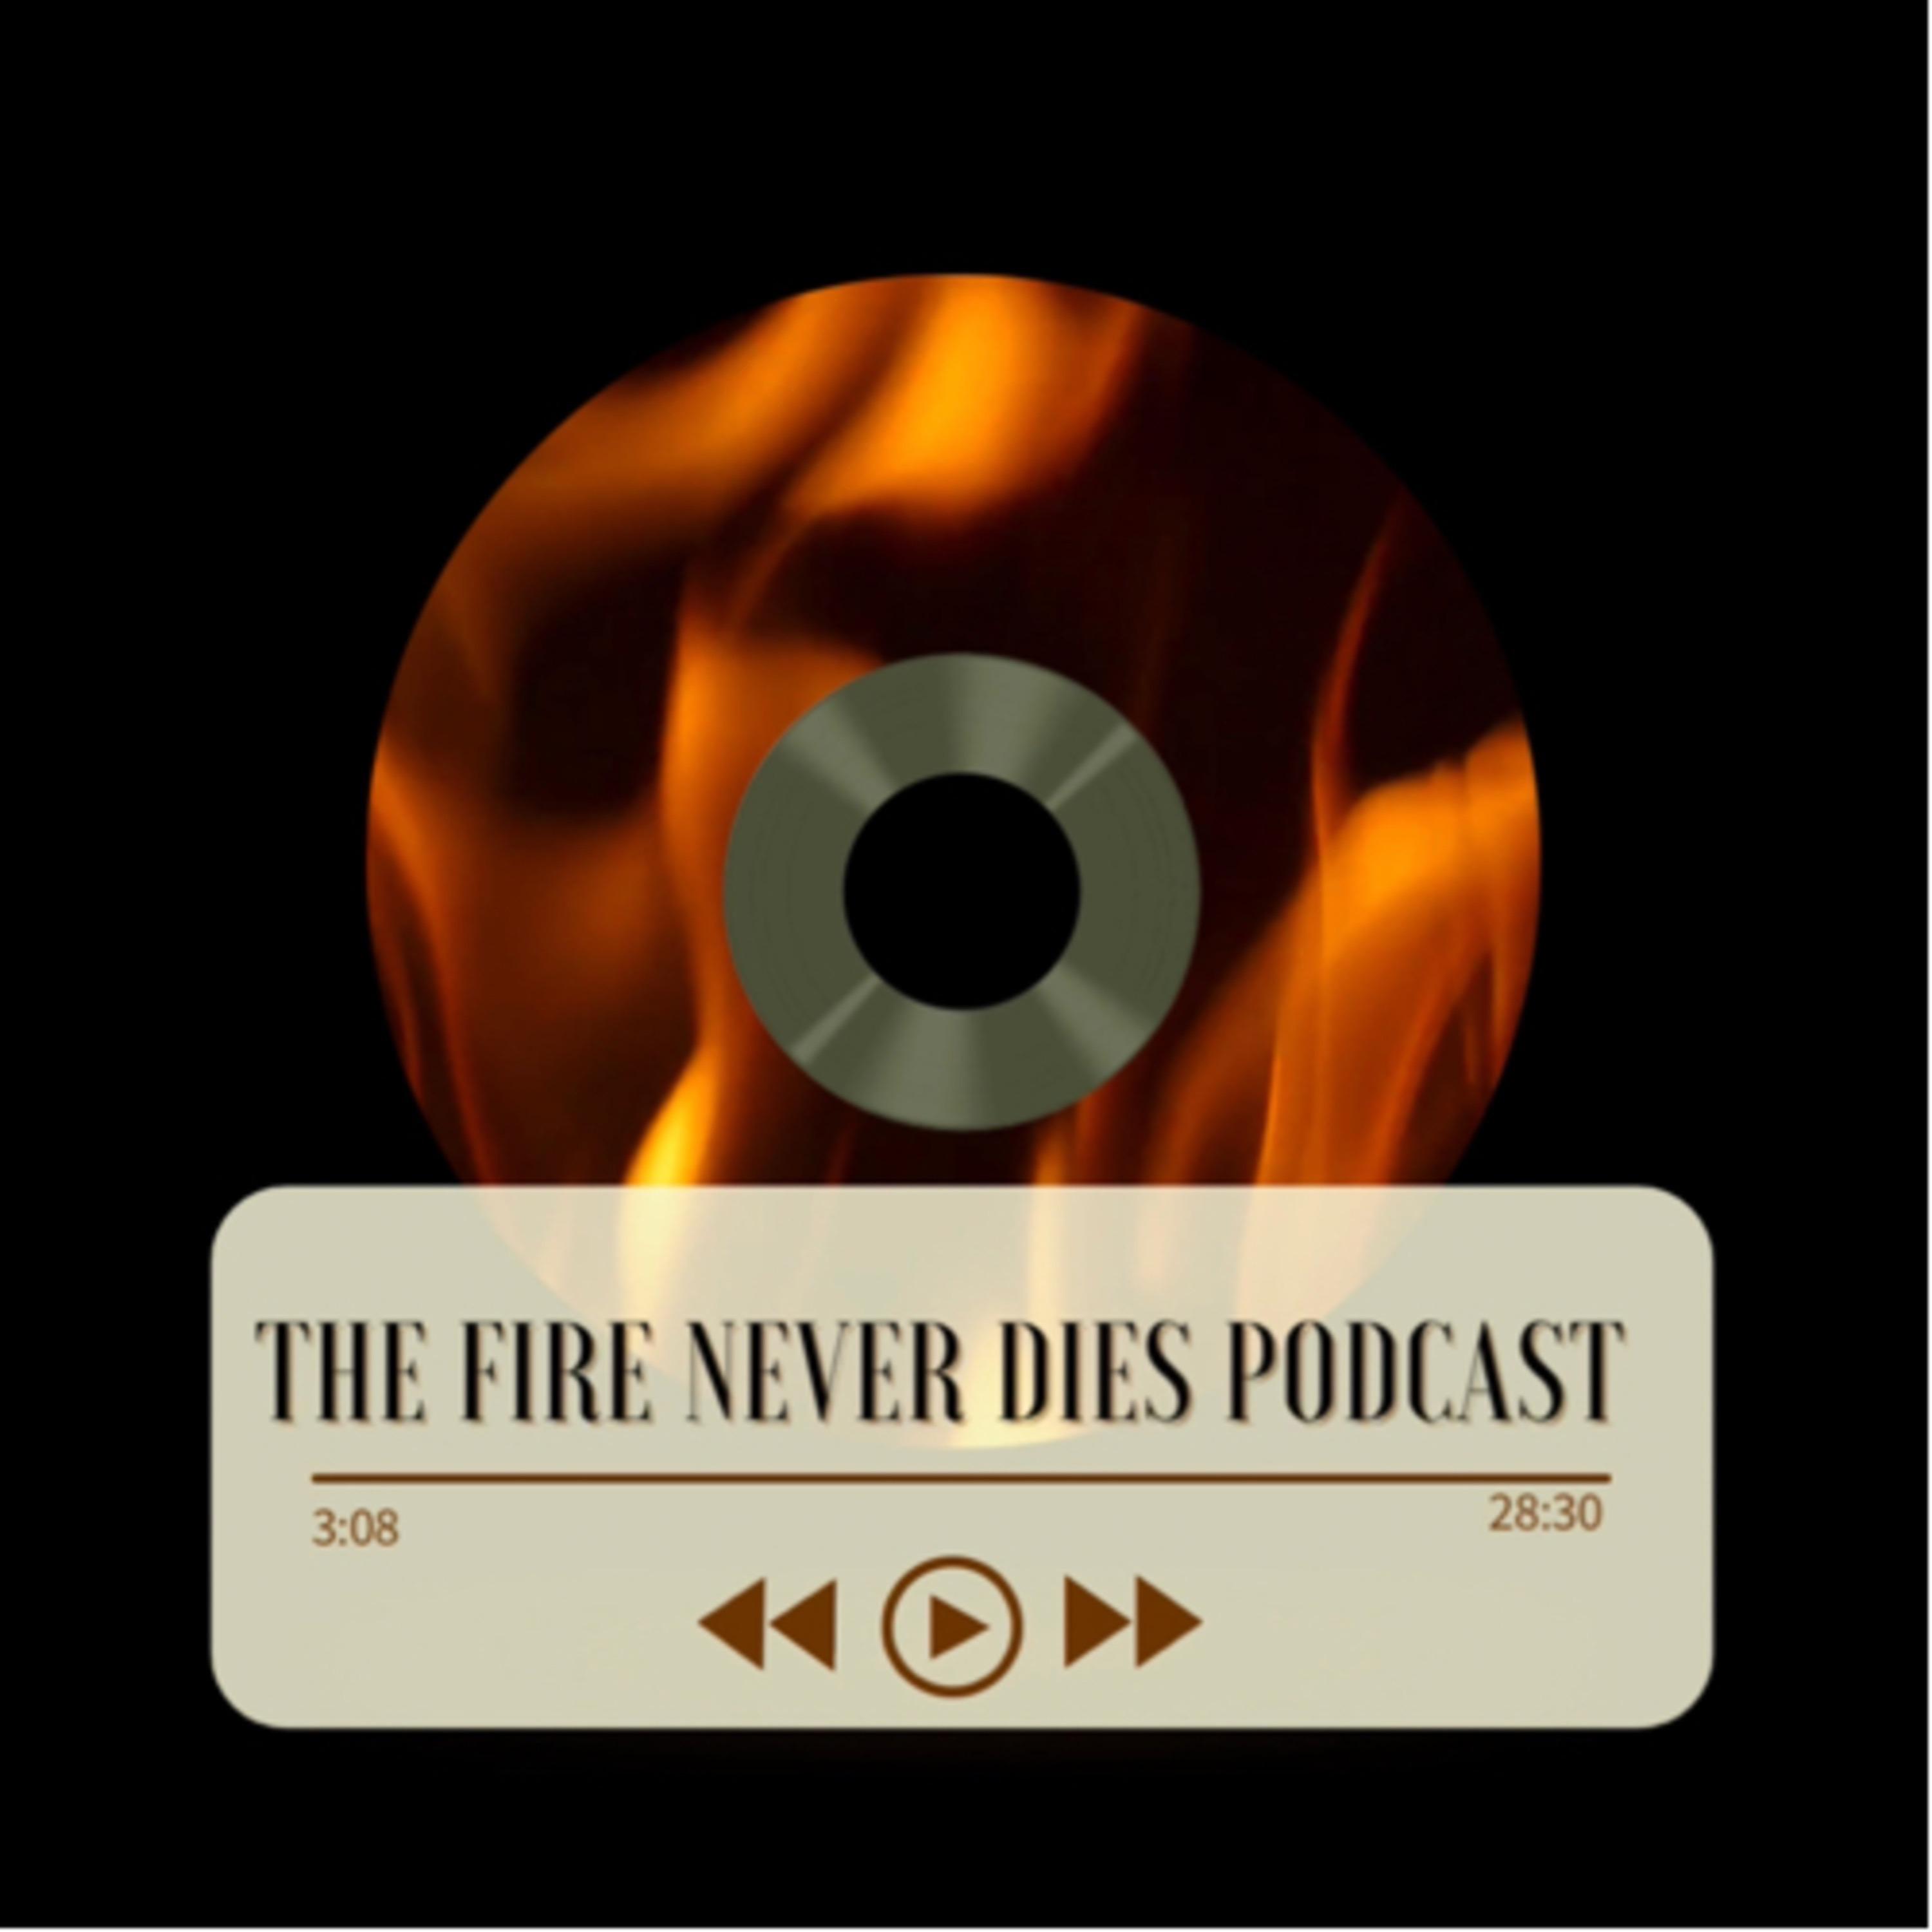 The Fire Never Dies Podcast ∞